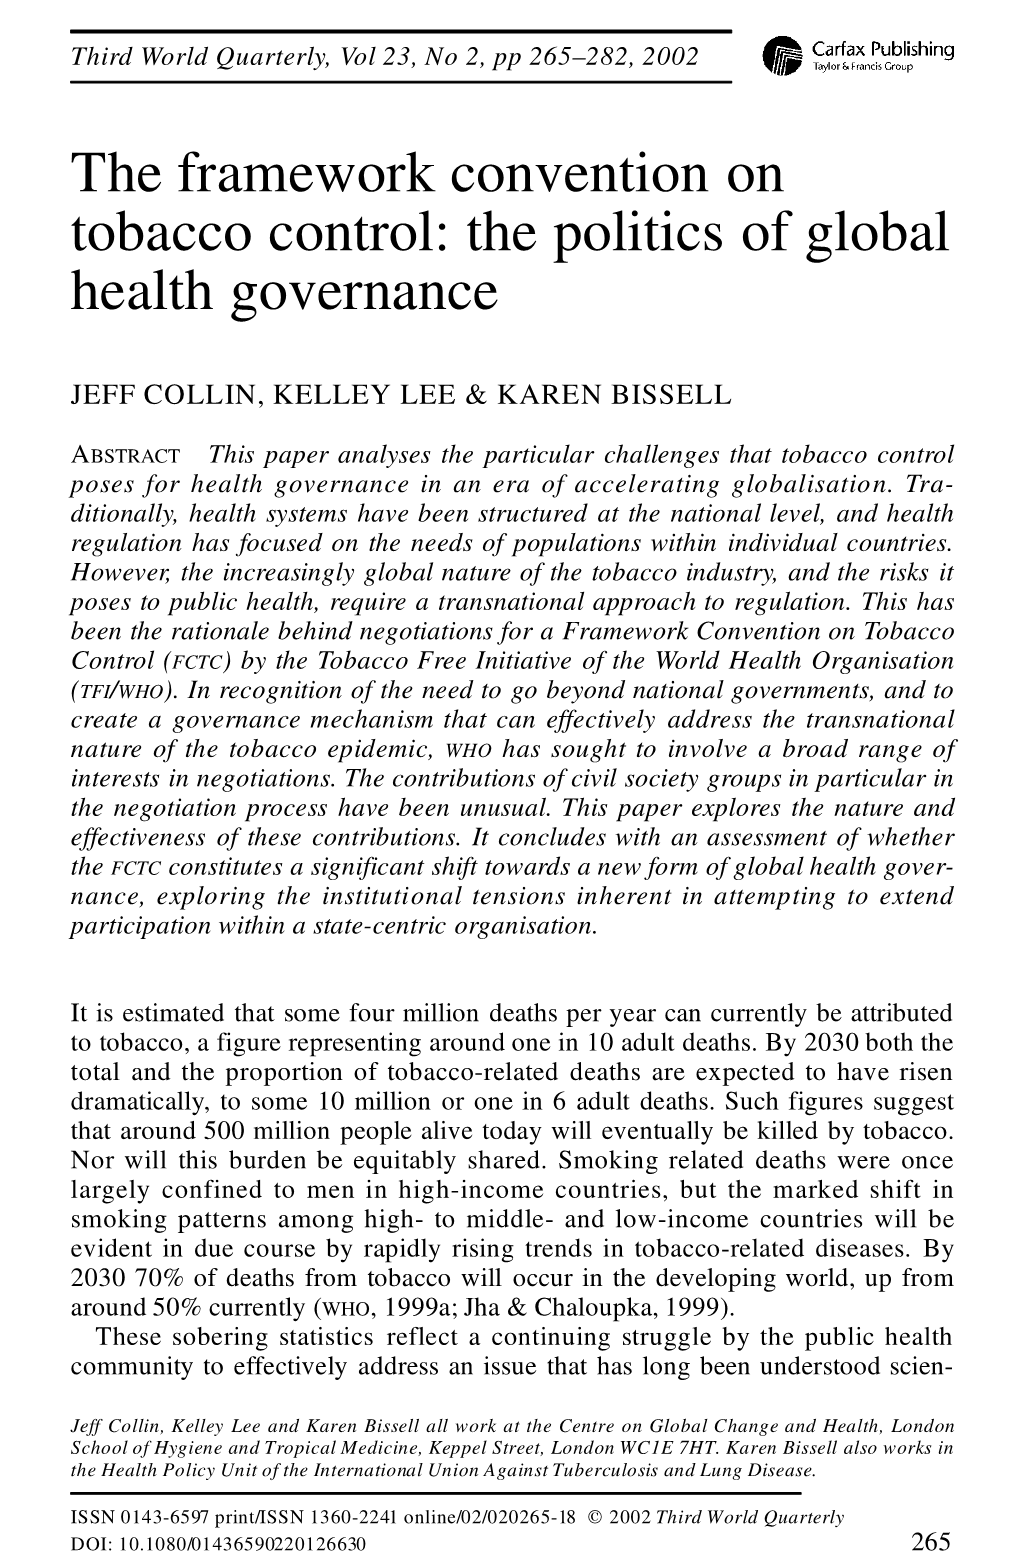 The Framework Convention on Tobacco Control: the Politics of Global Health Governance